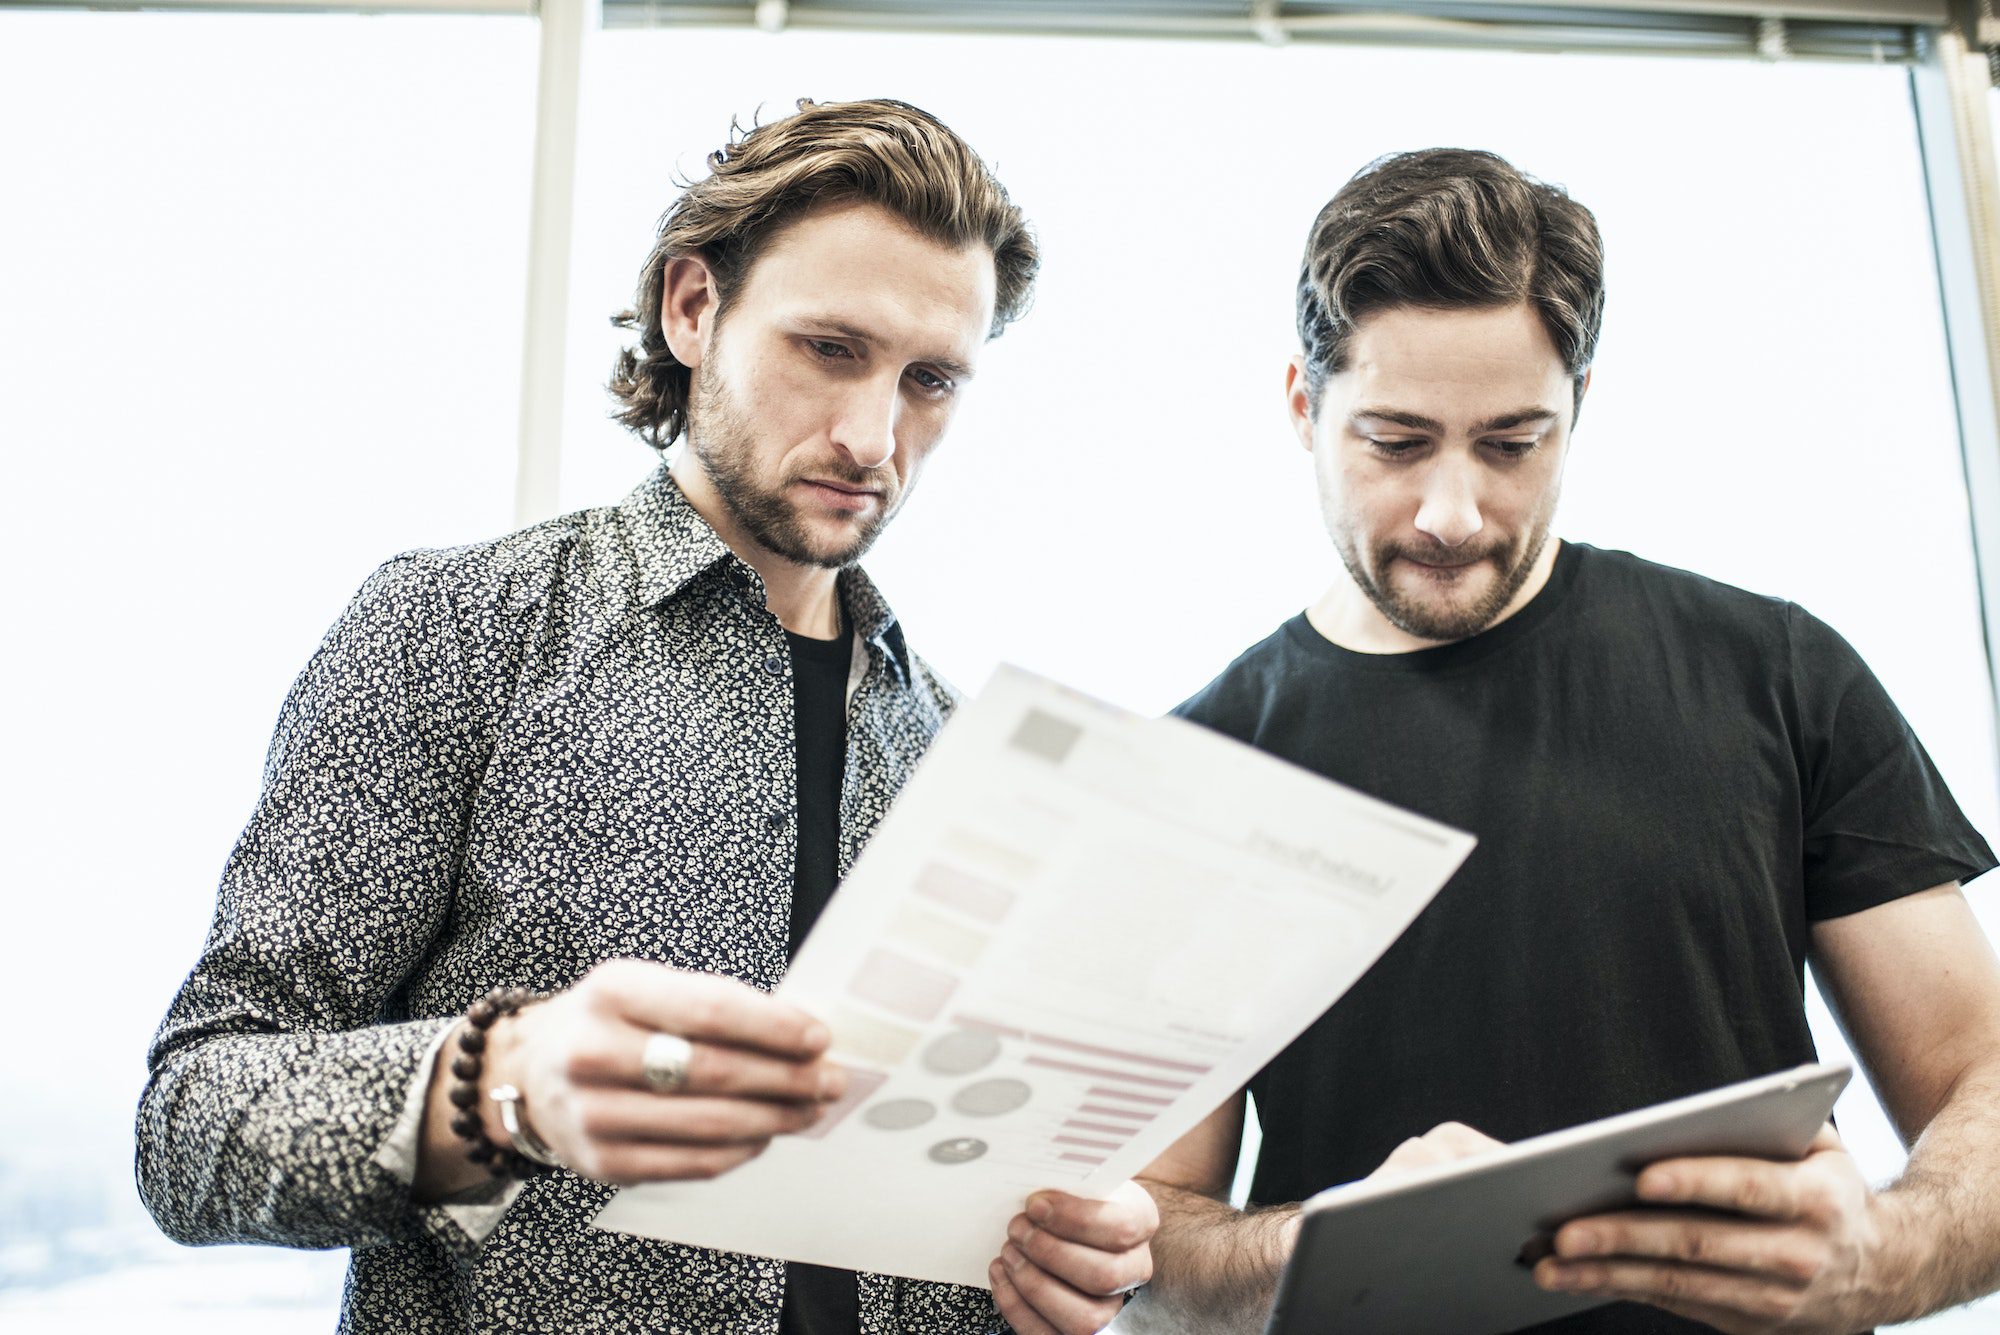 Two men standing in an office, looking at a page of printing, and referring to a digital tablet.